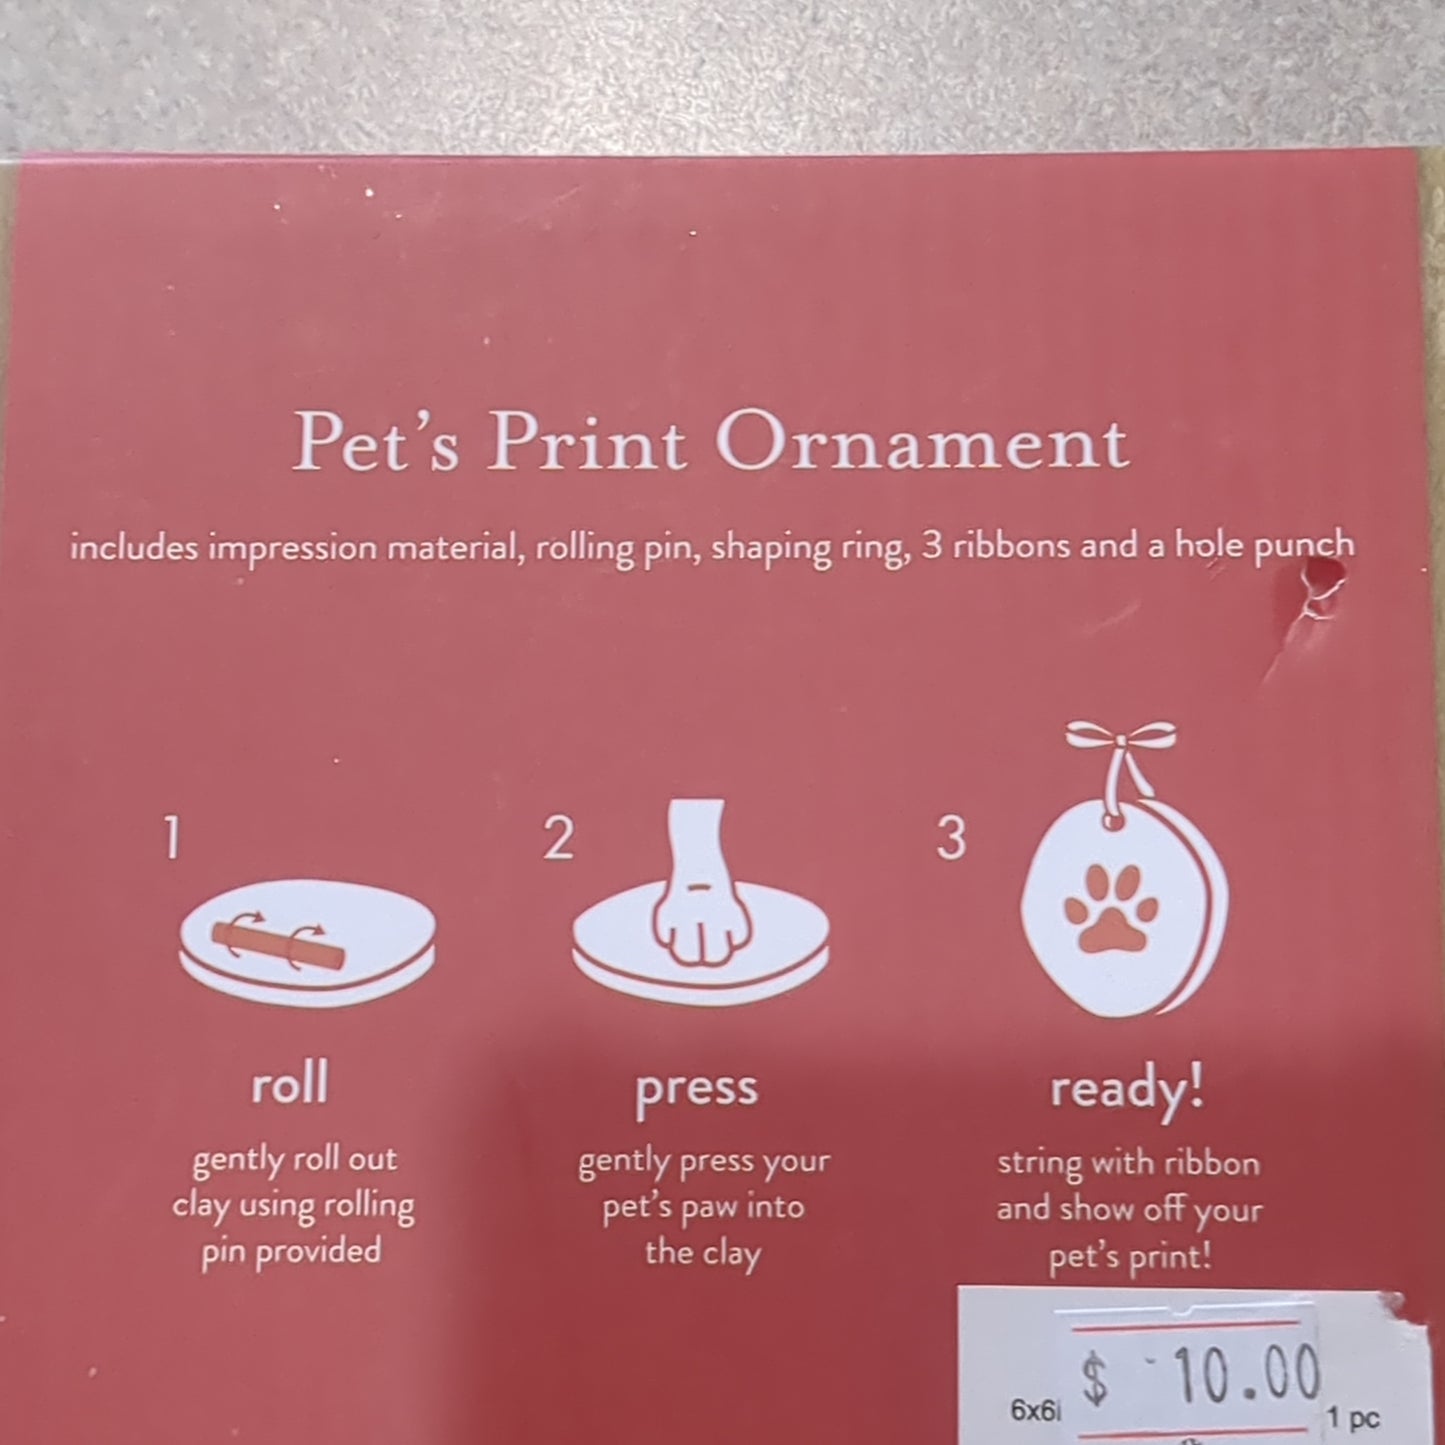 Pets print ornament making kit perfect for kids and pets